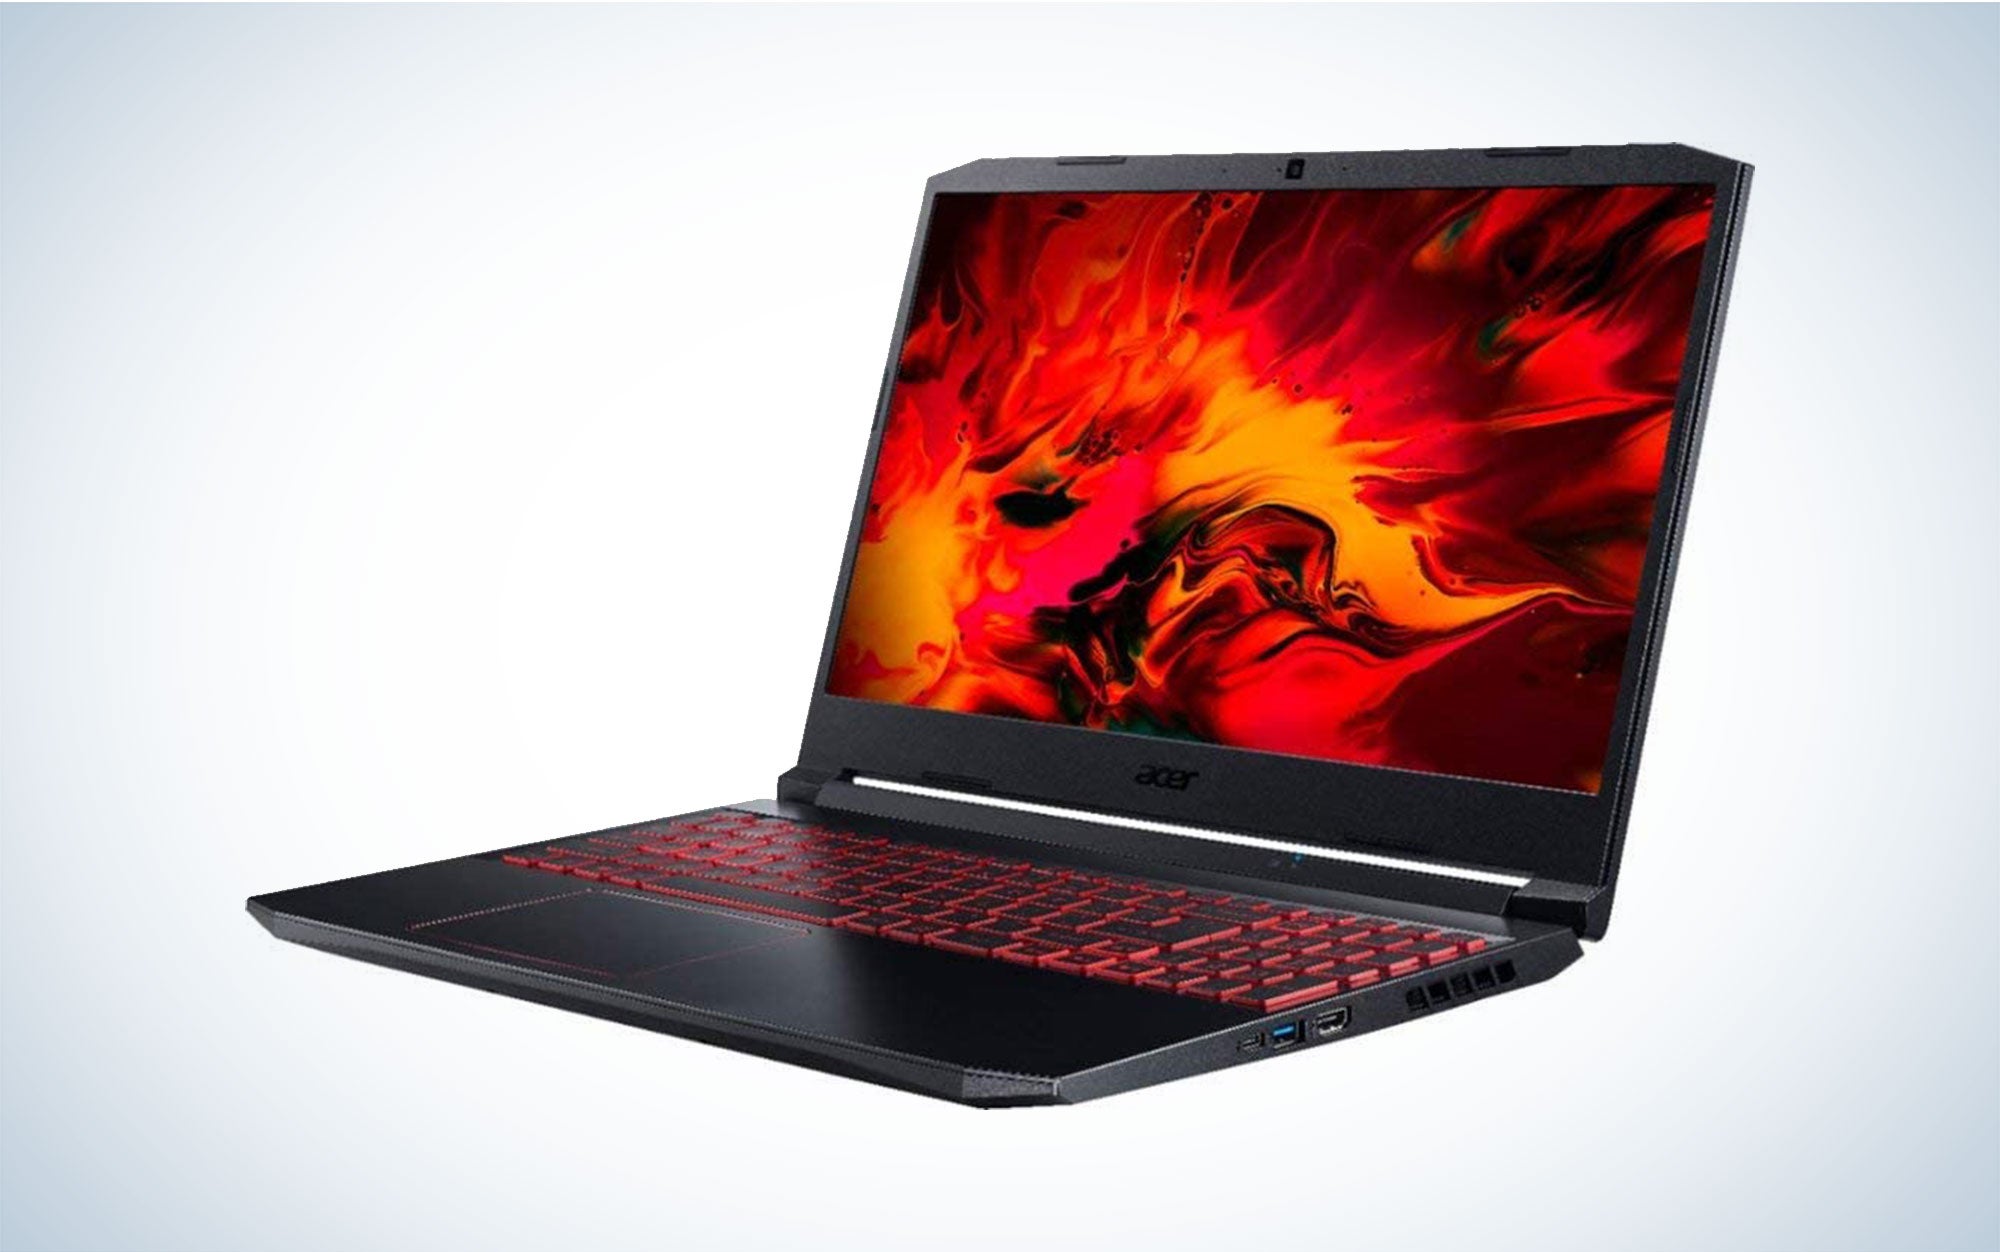 Acer Nitro 5 is our pick for best cheap gaming laptop.